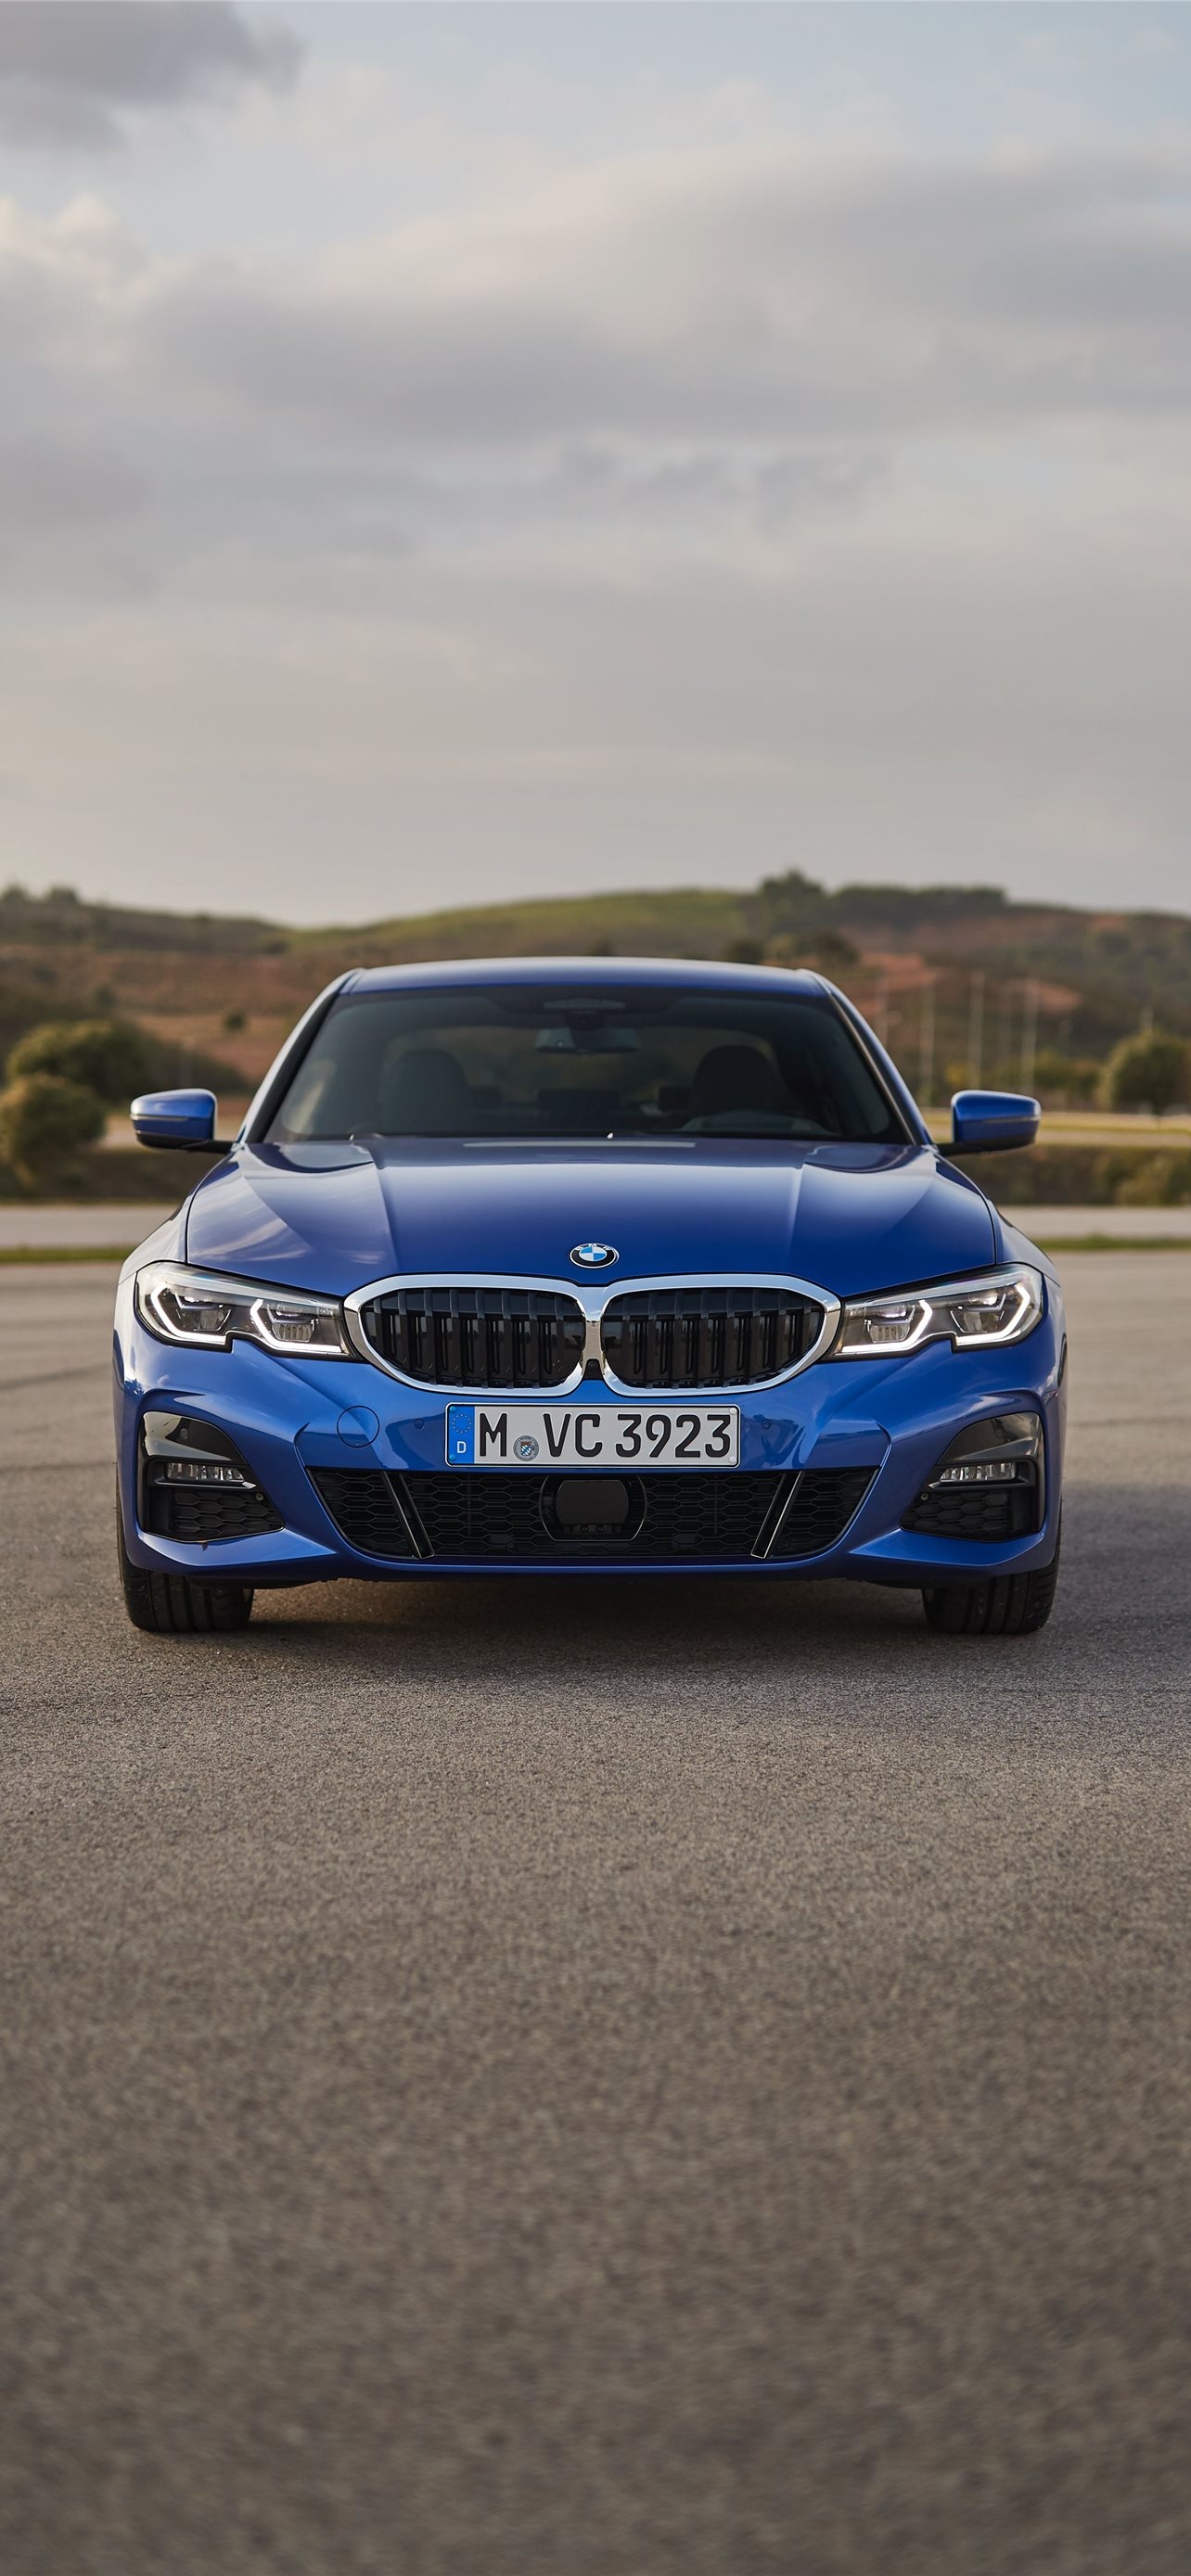 BMW 3 Series, Best wallpapers, High-quality images, Perfect for BMW admirers, 1290x2780 HD Handy